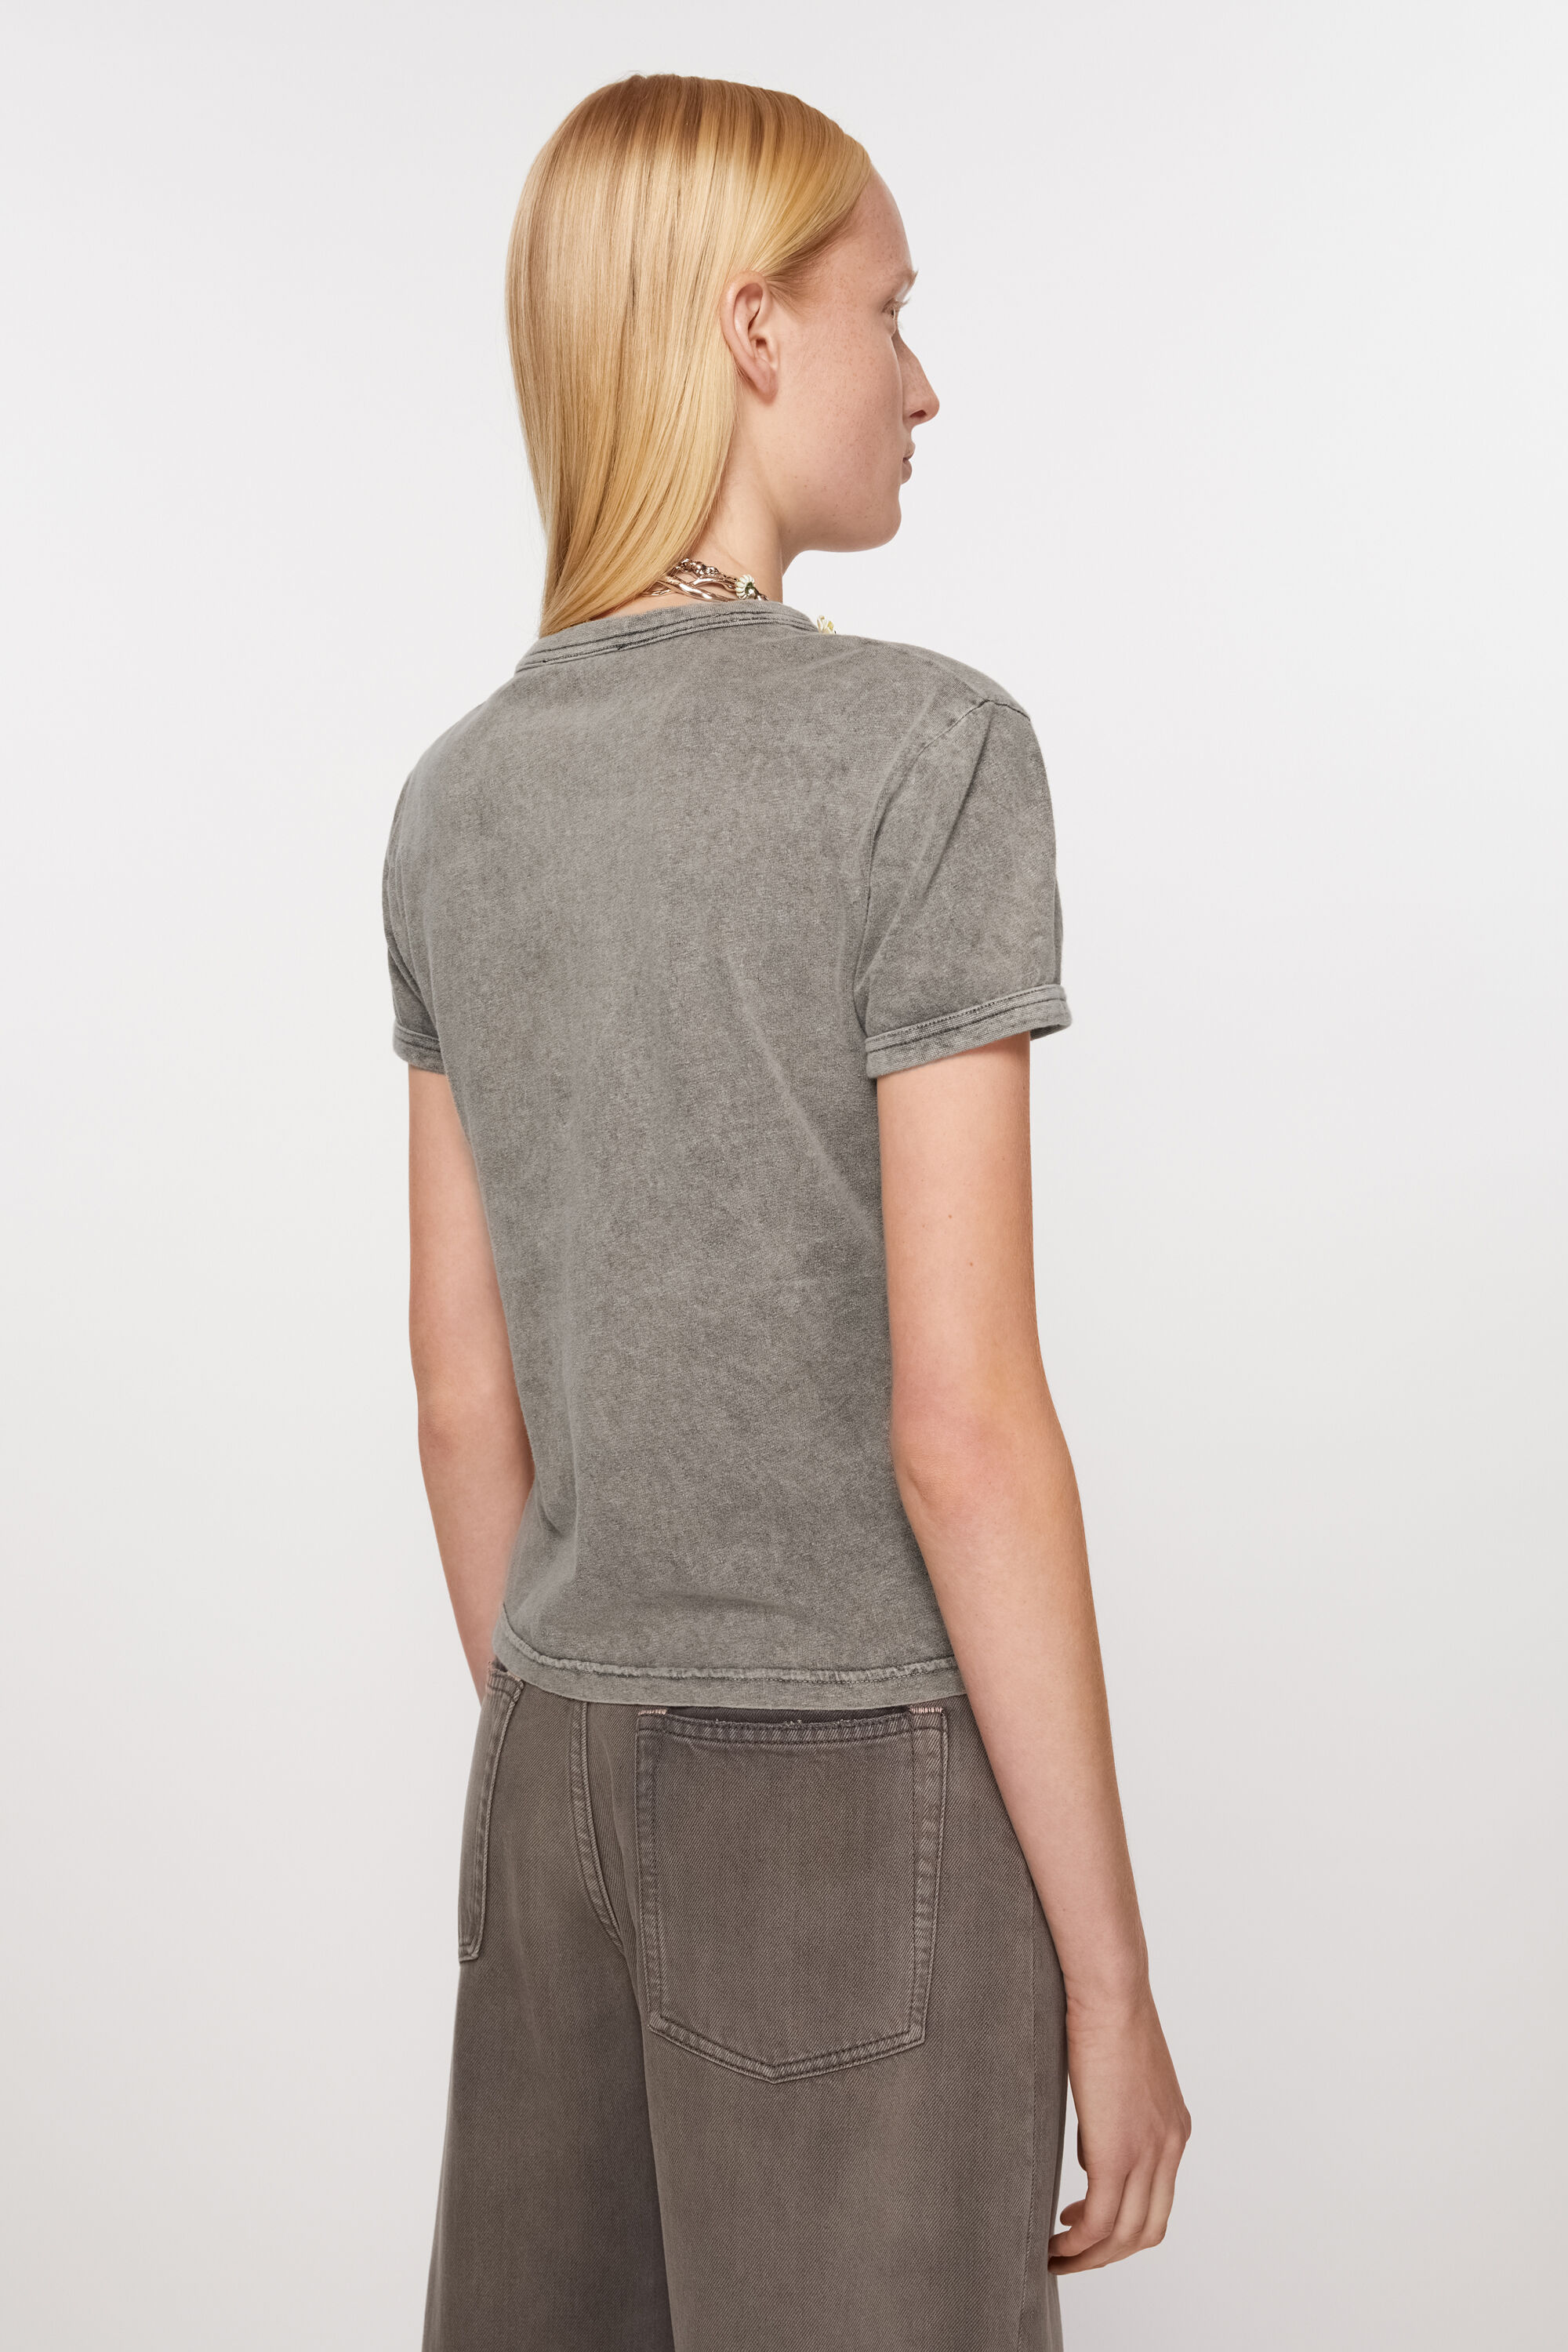 Acne Studios - T-shirt blurred logo - Fitted fit - Faded Grey